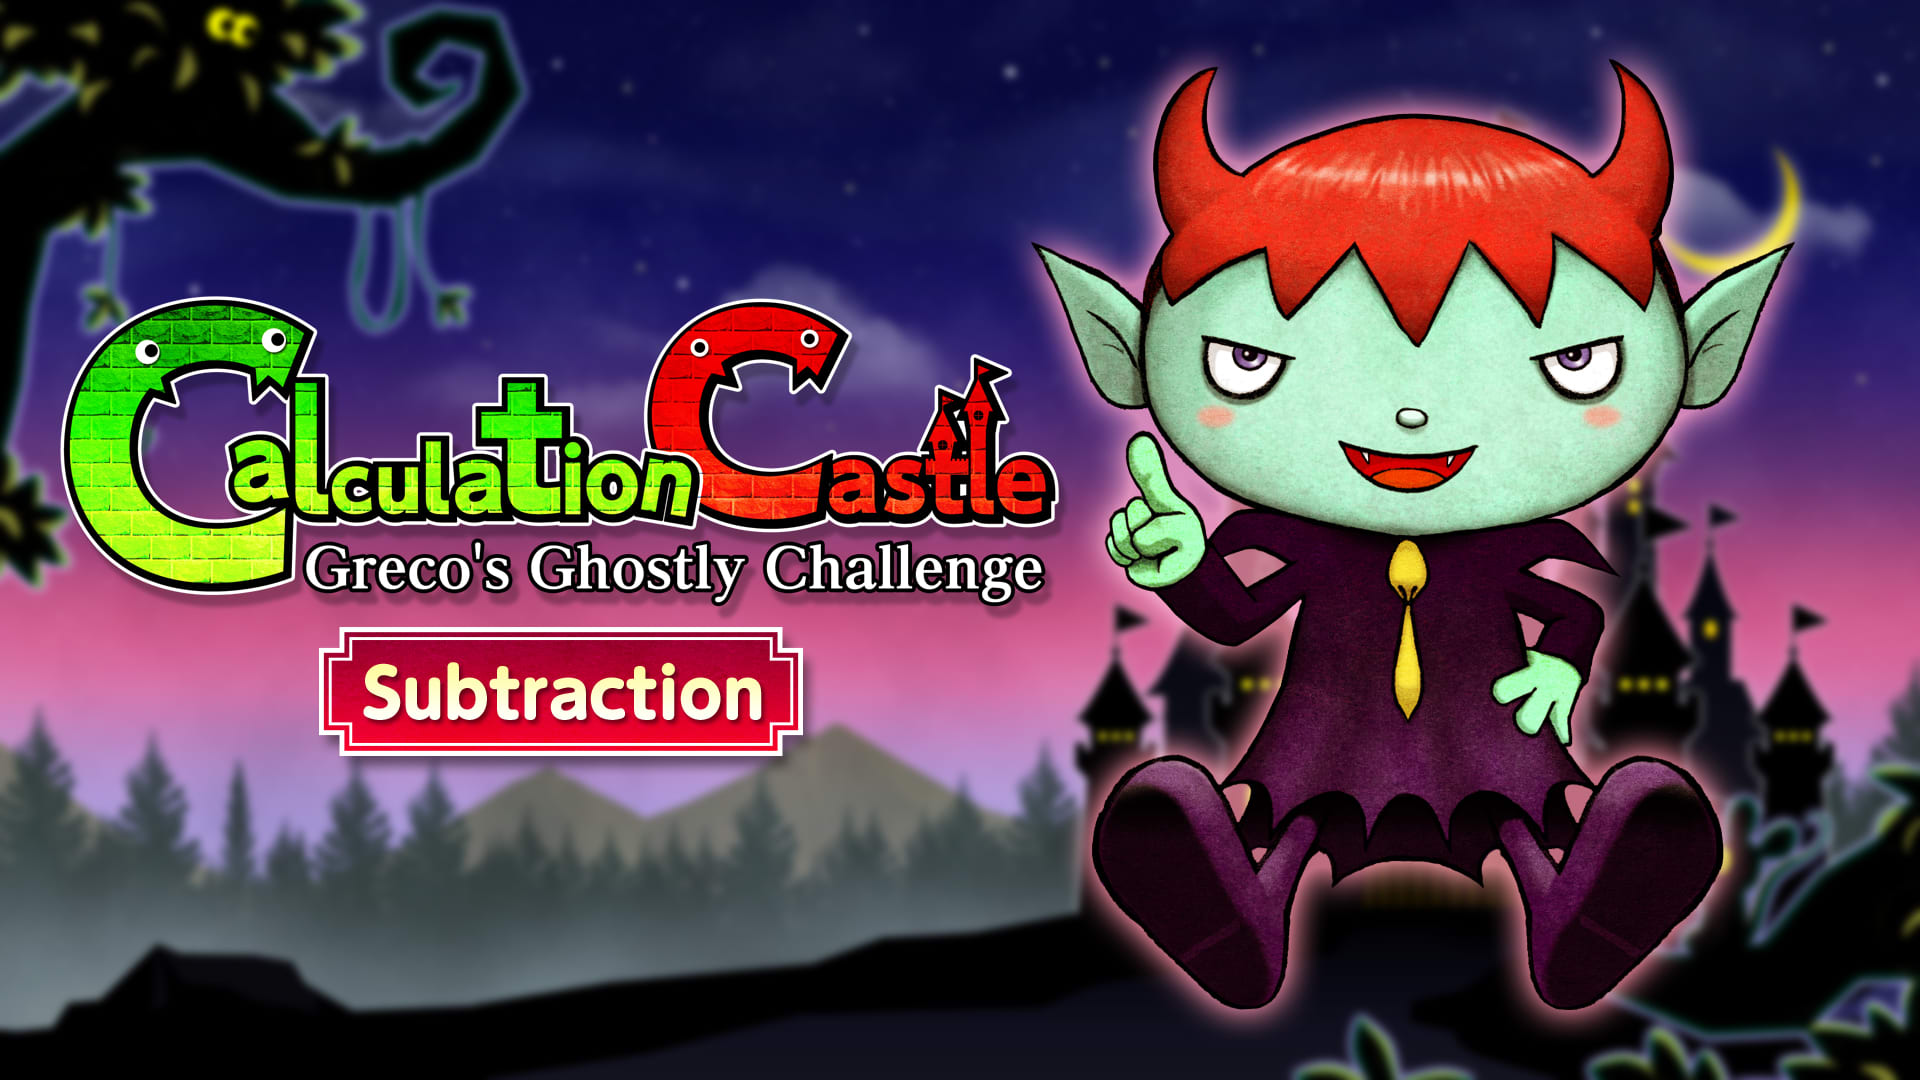 Calculation Castle : Greco's Ghostly Challenge "Subtraction "